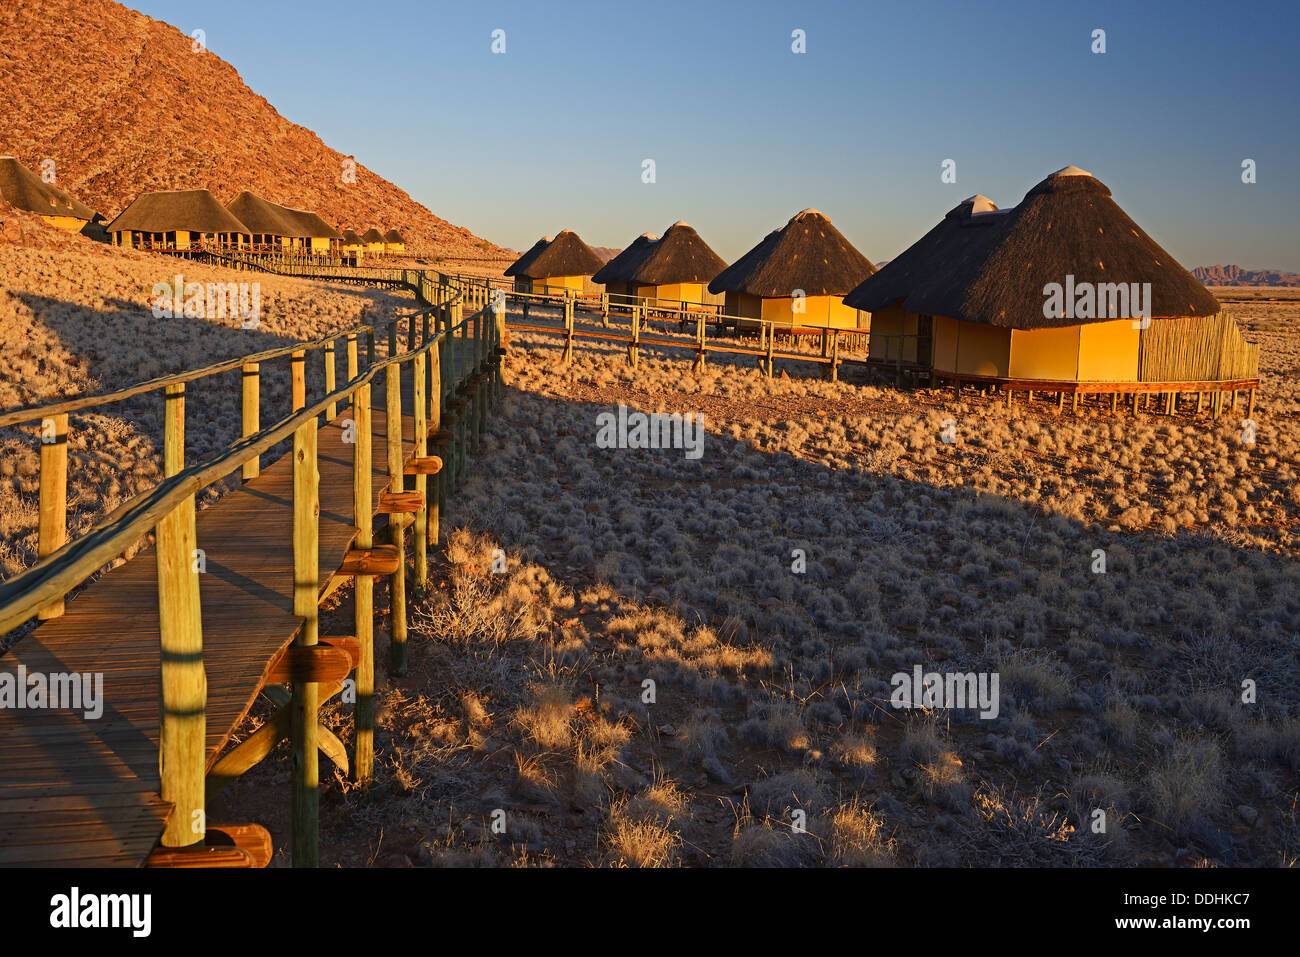 Chalets or cabins of the Sossus Dune Lodge in the evening light Stock Photo